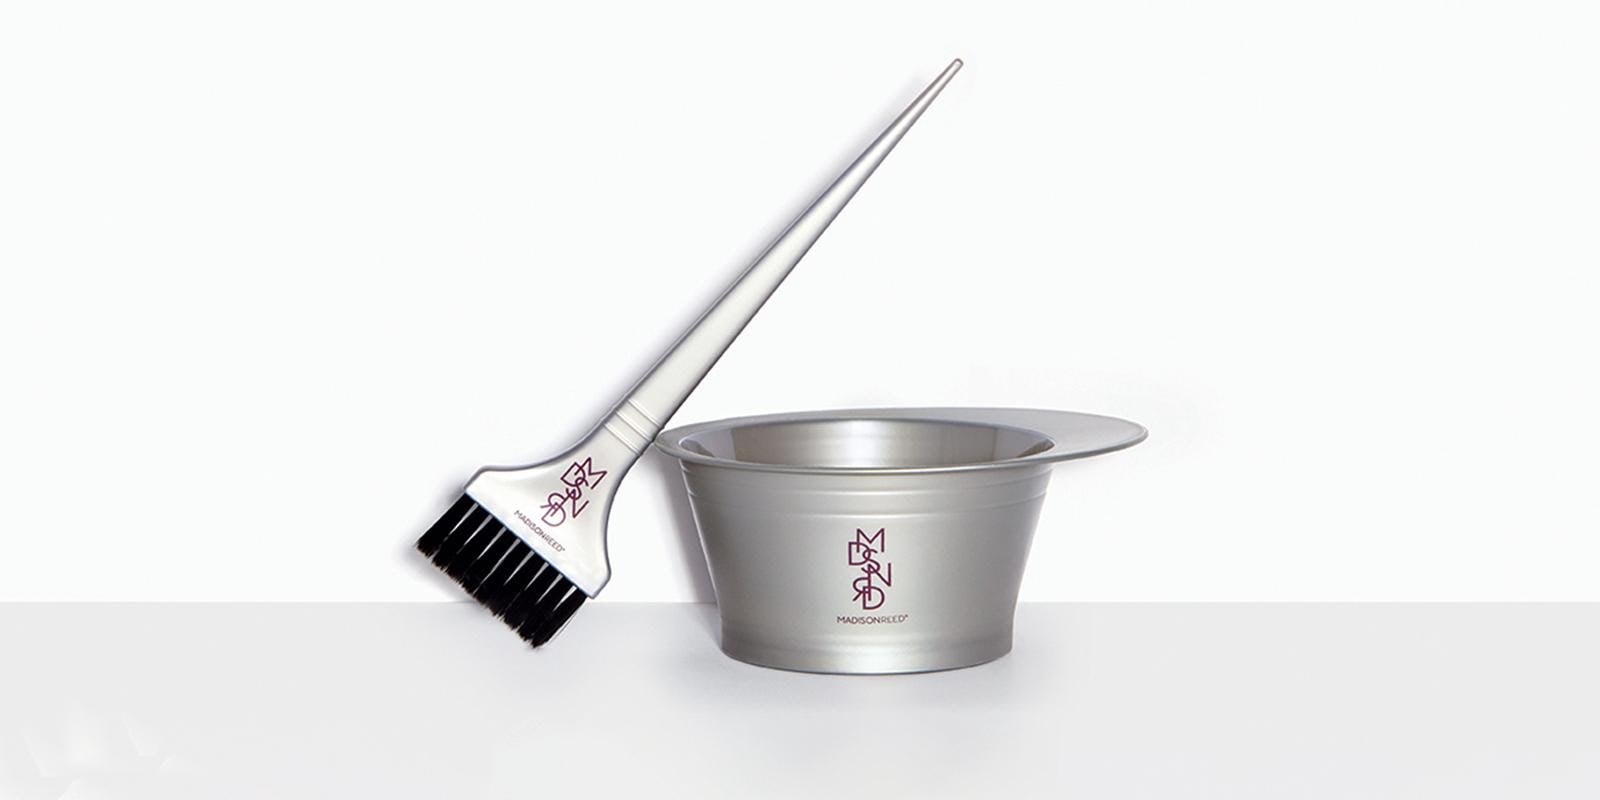 BLOG.05.20_ How to Use a Bowl and Brush To Color Your Hair for the First Time